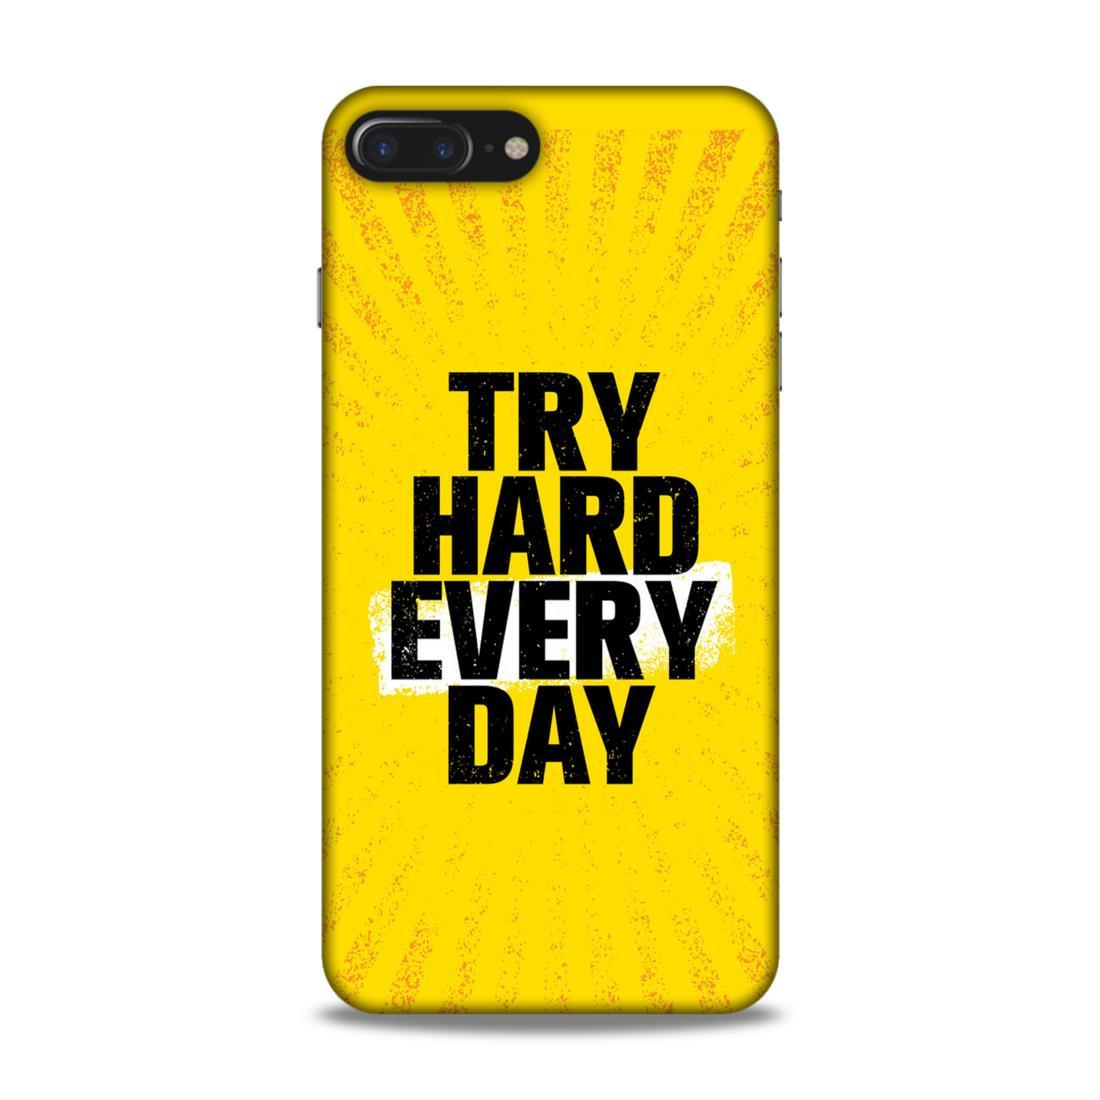 Try Hard Every Day iPhone 8 Plus Mobile Case Cover